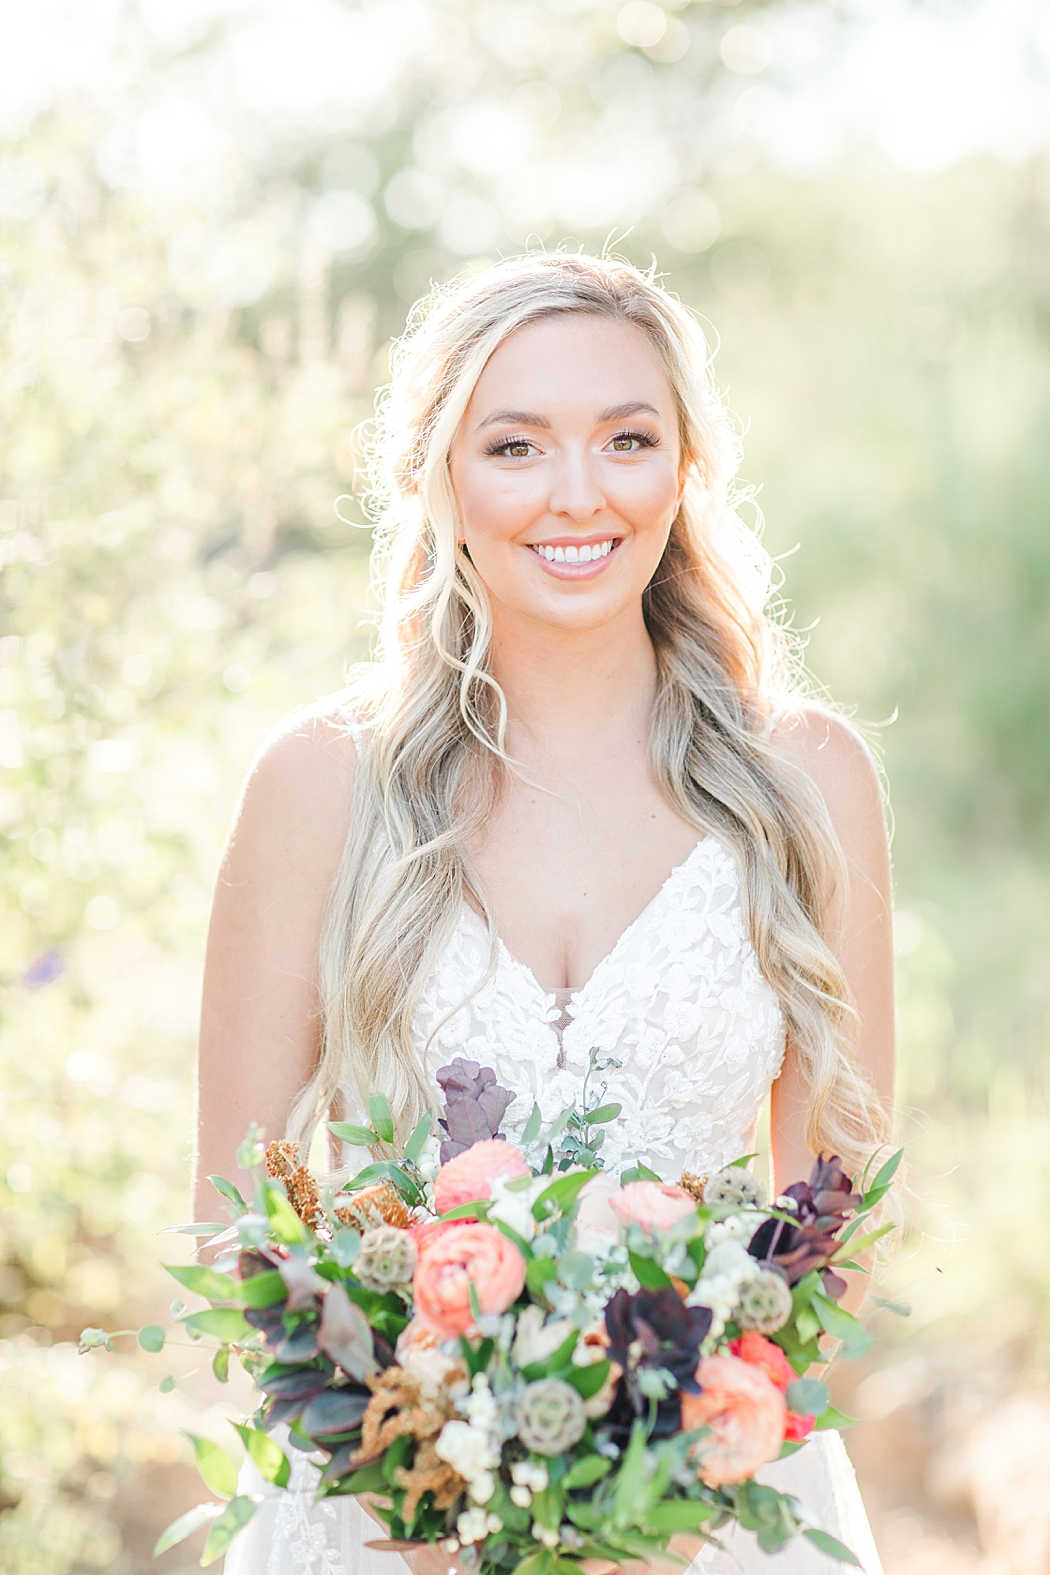 Summer Bridal Session at Contigo Ranch in Frederickburg Texas by Allison Jeffers Photography 0005